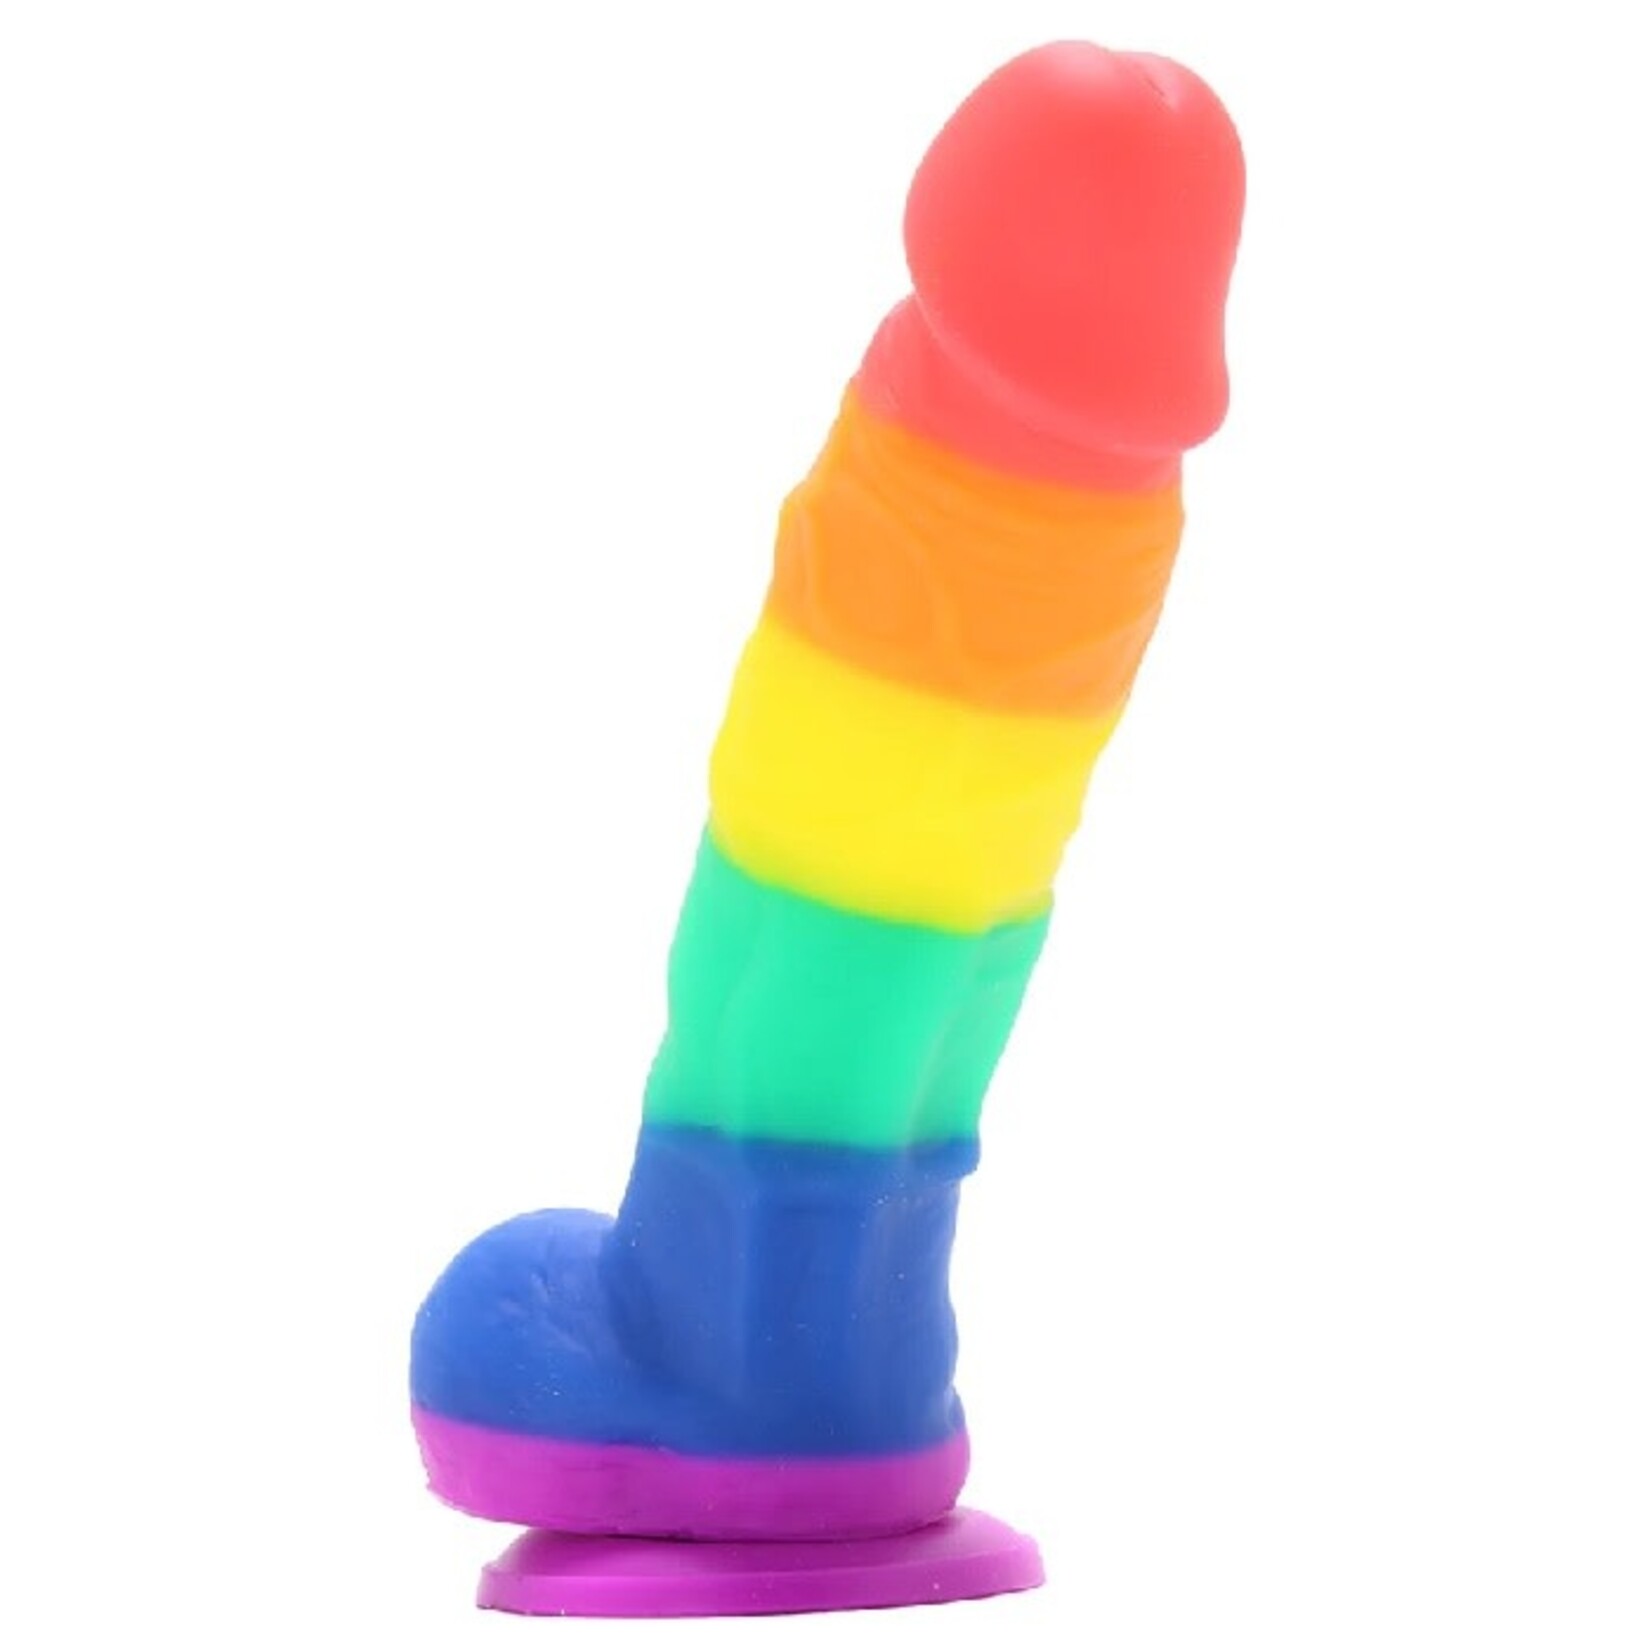 NSNOVELTIES COLOURS PRIDE EDITION 5 INCH SILICONE DILDO IN RAINBOW